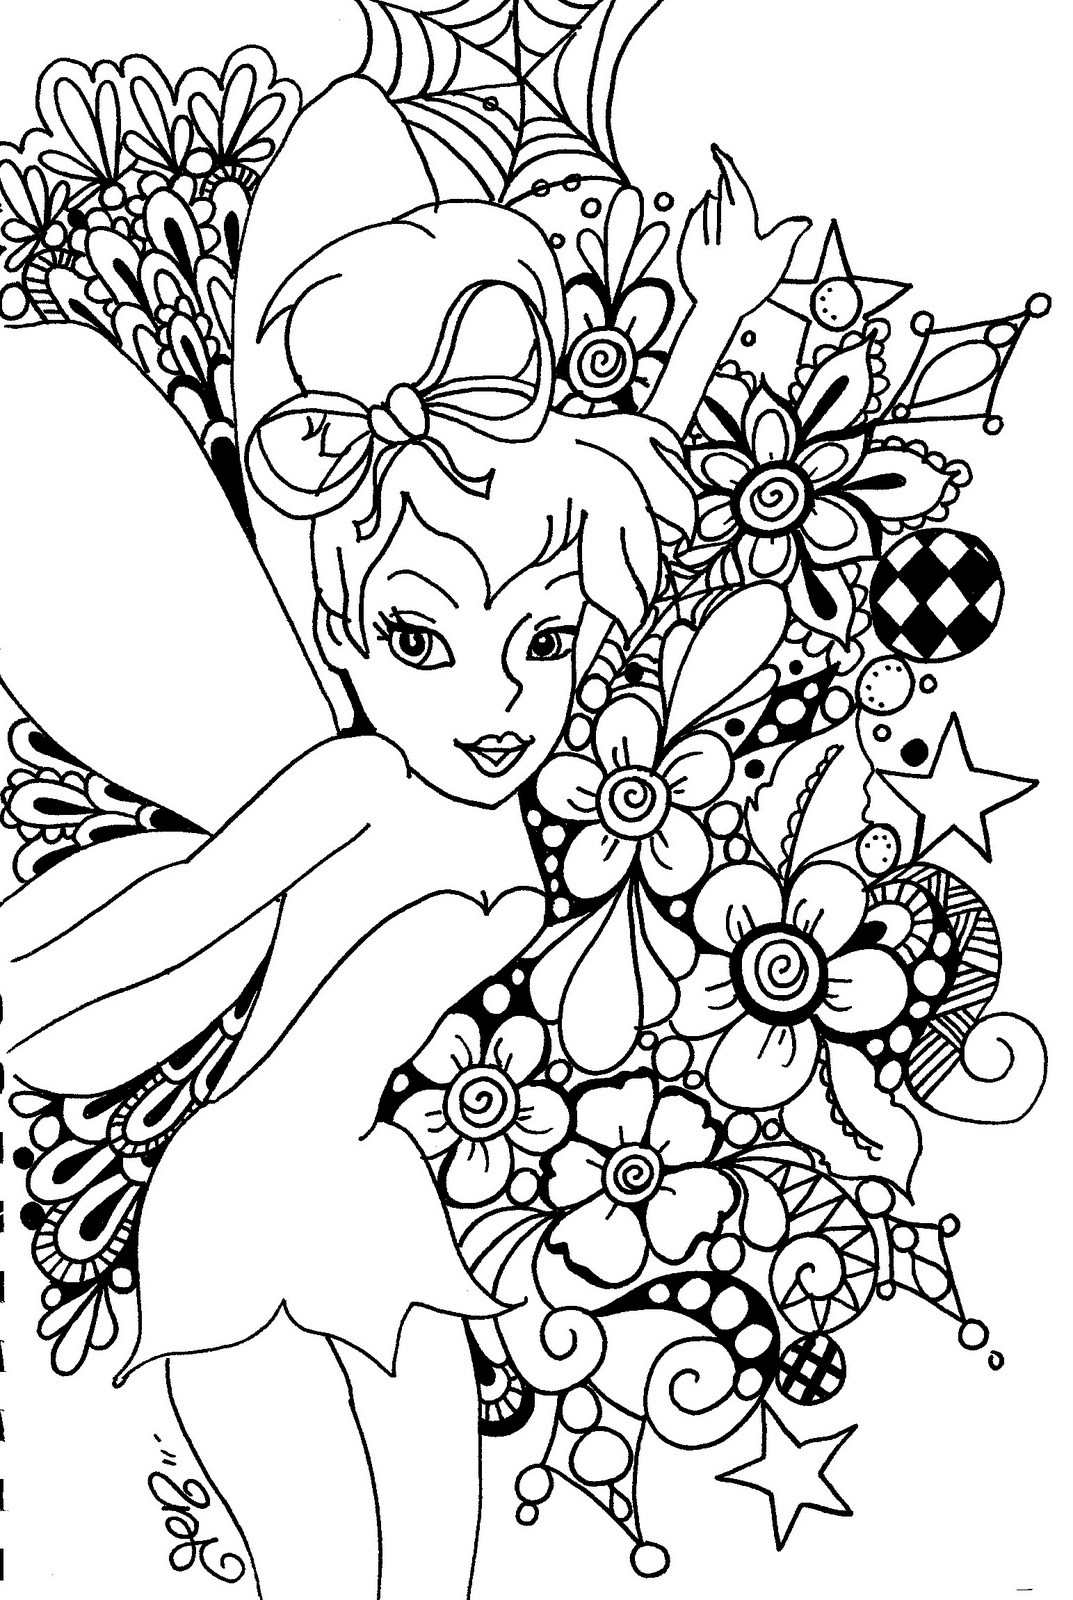 Adult Coloring Pages Fairies
 FAIRY COLORING PAGES